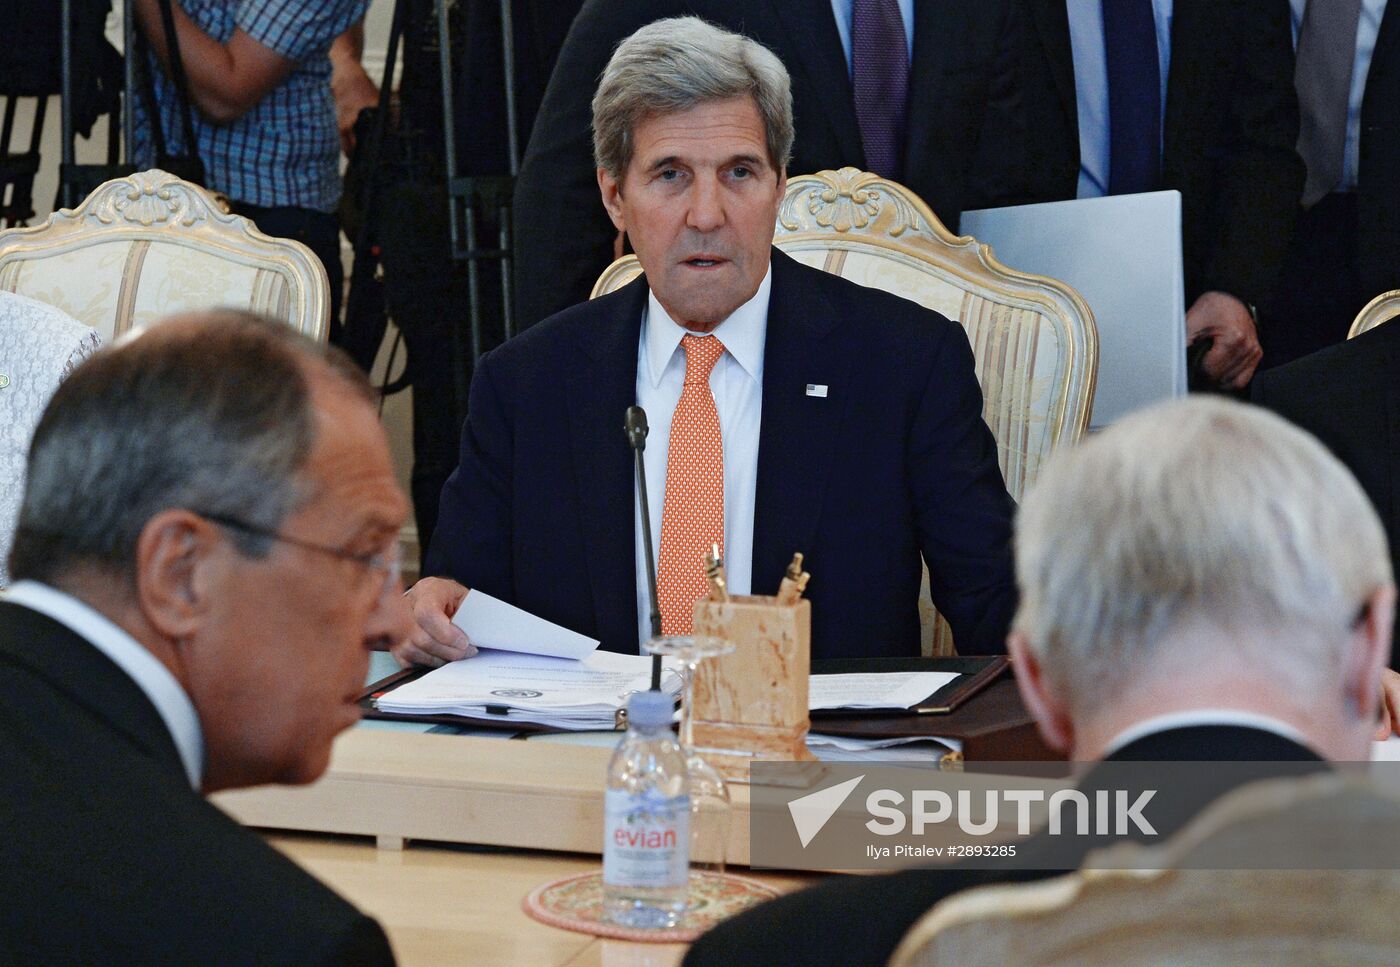 Foreign Minister Sergei Lavrov meets with US Secretary of State John Kerry